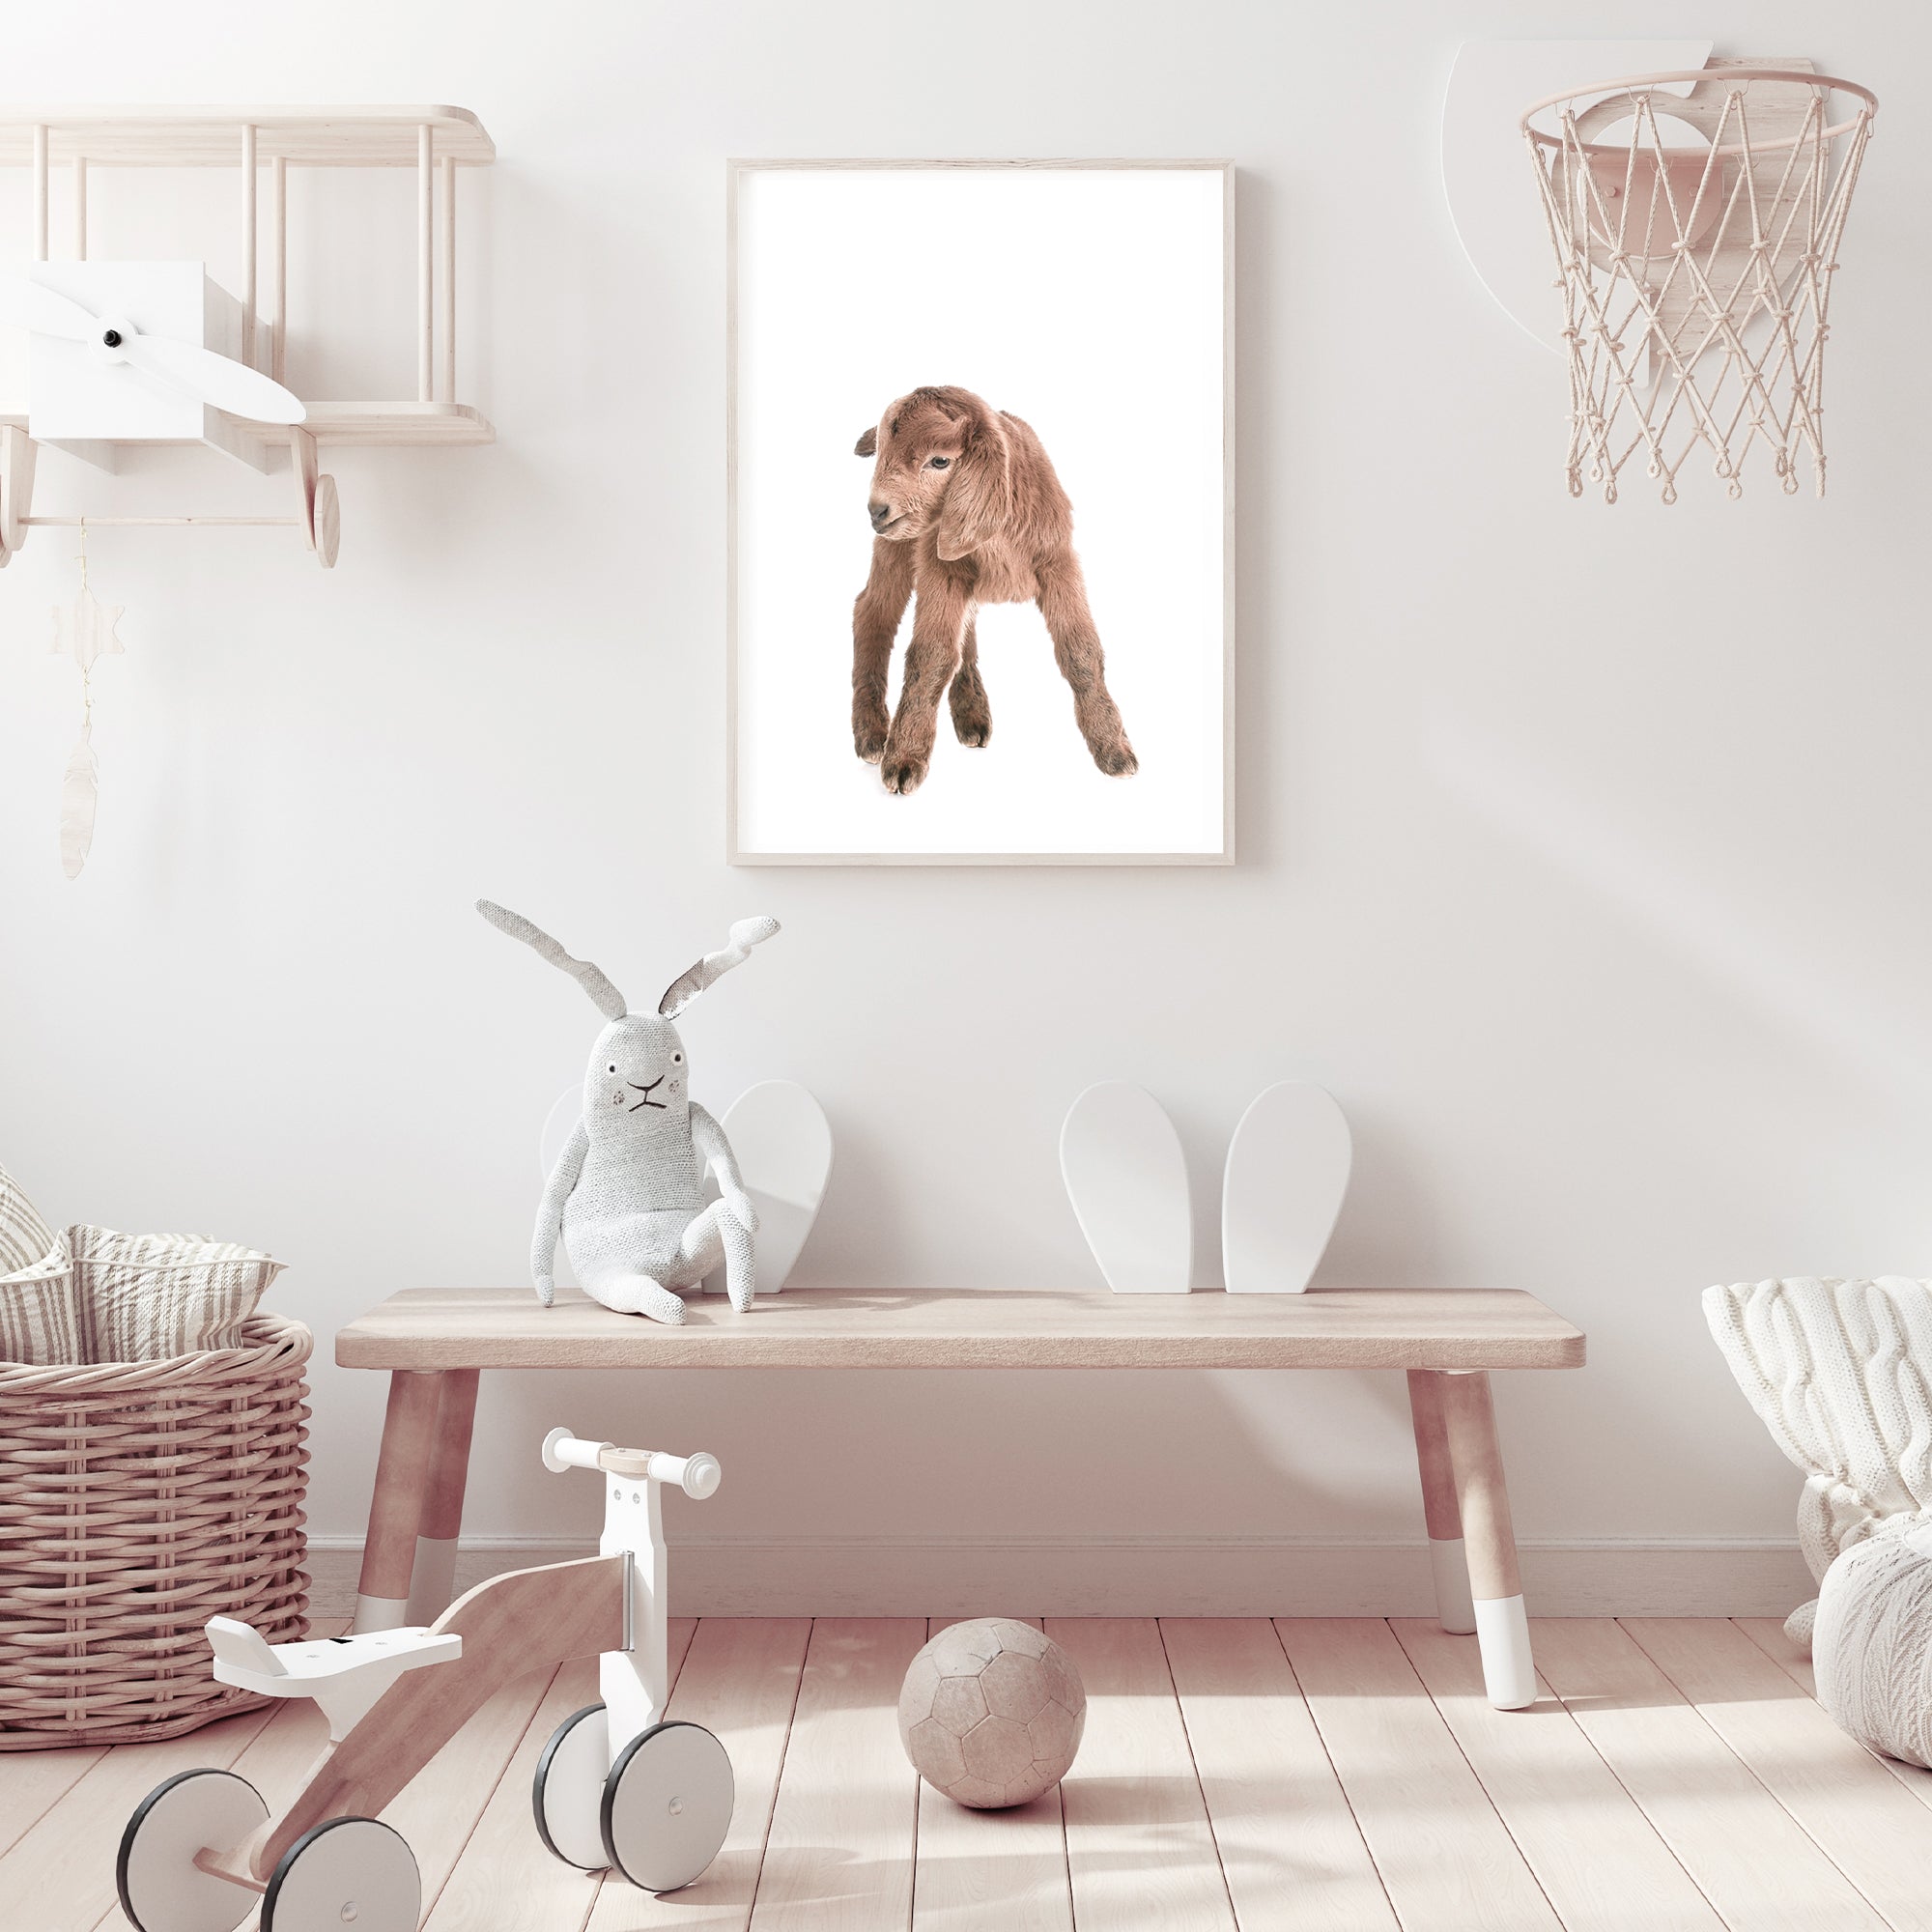 Featuring the animal Baby Goat photo art print, available in an unframed poster print, stretched canvas or with a timber, white or black frame, for your nursery